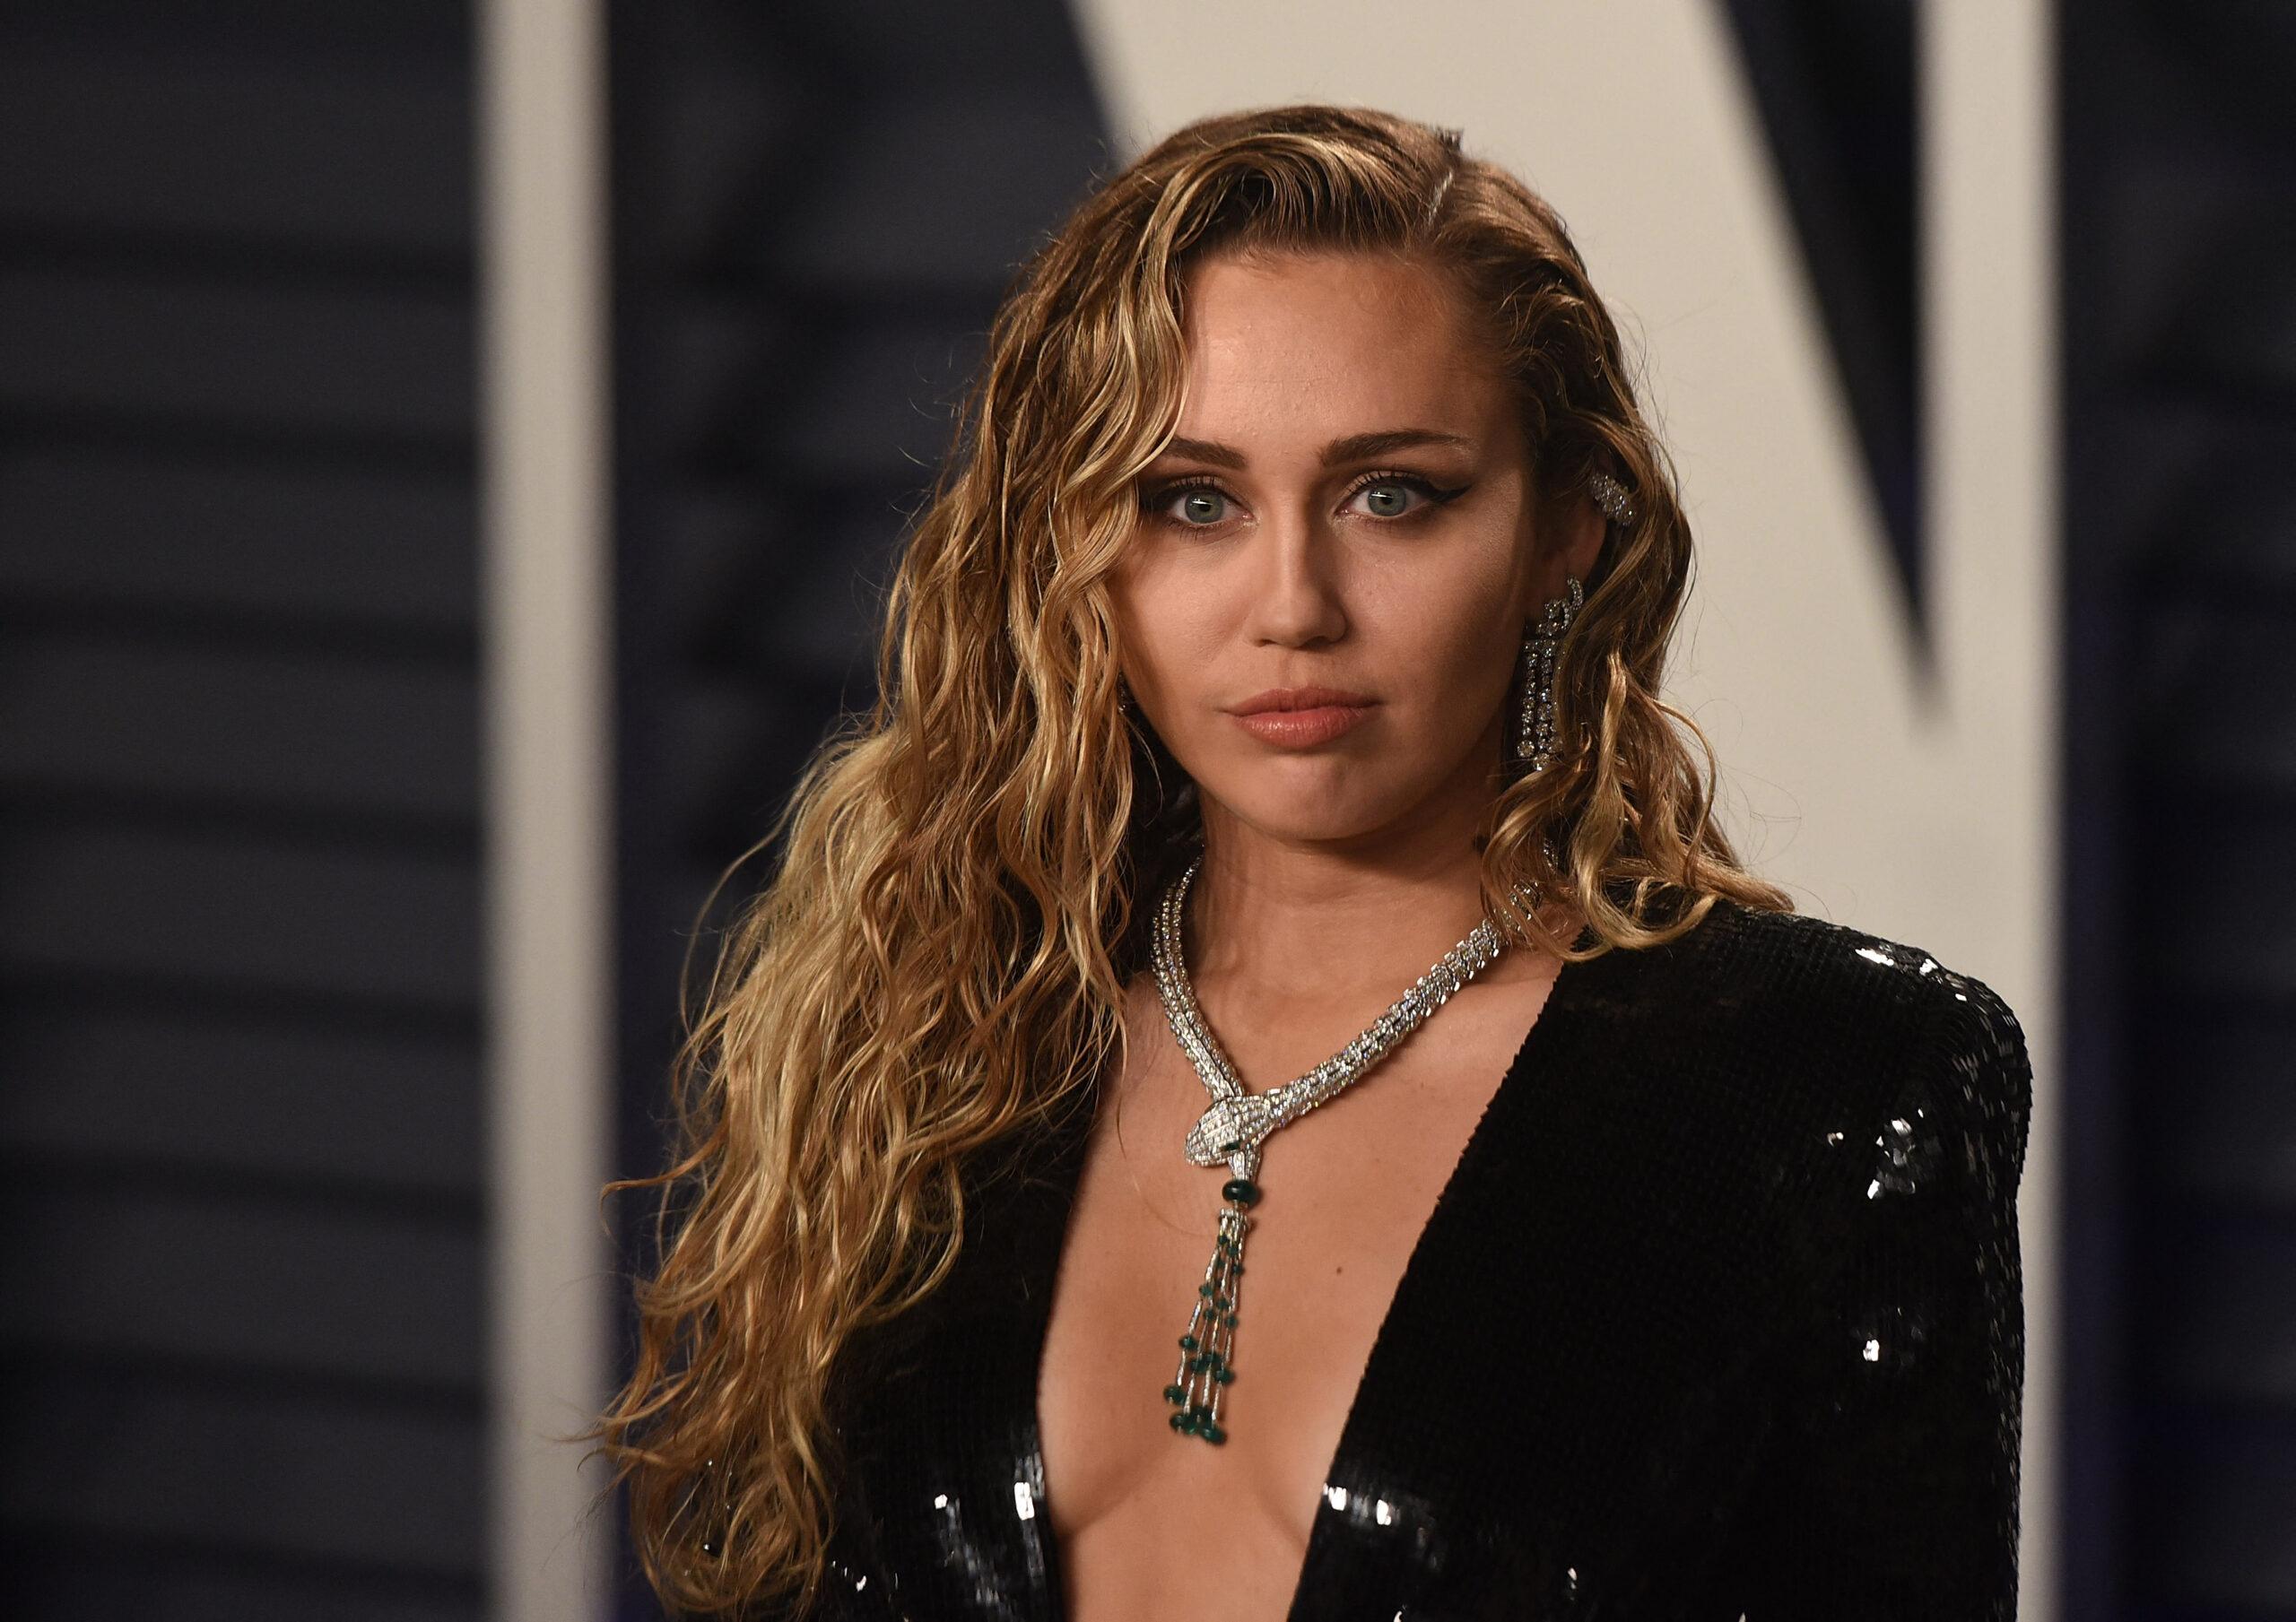 Miley Cyrus's Accusations Against Disney For Intense Work Schedule Resurfaces